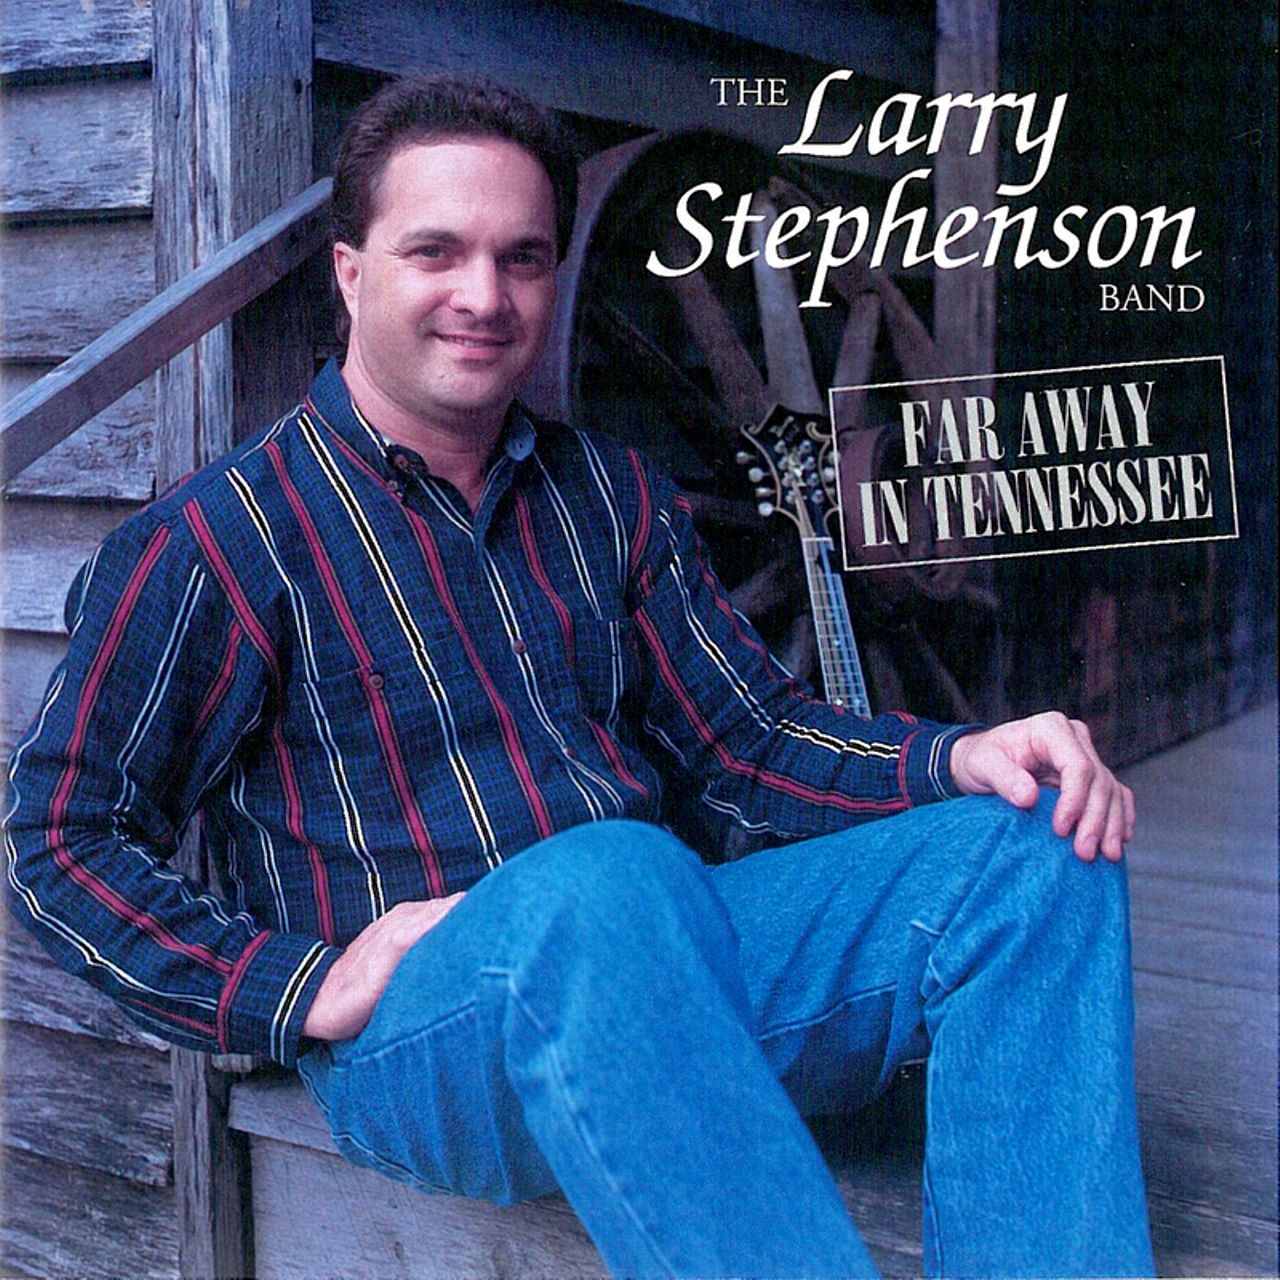 Larry Stephenson Band - Far Away In Tennessee cover album